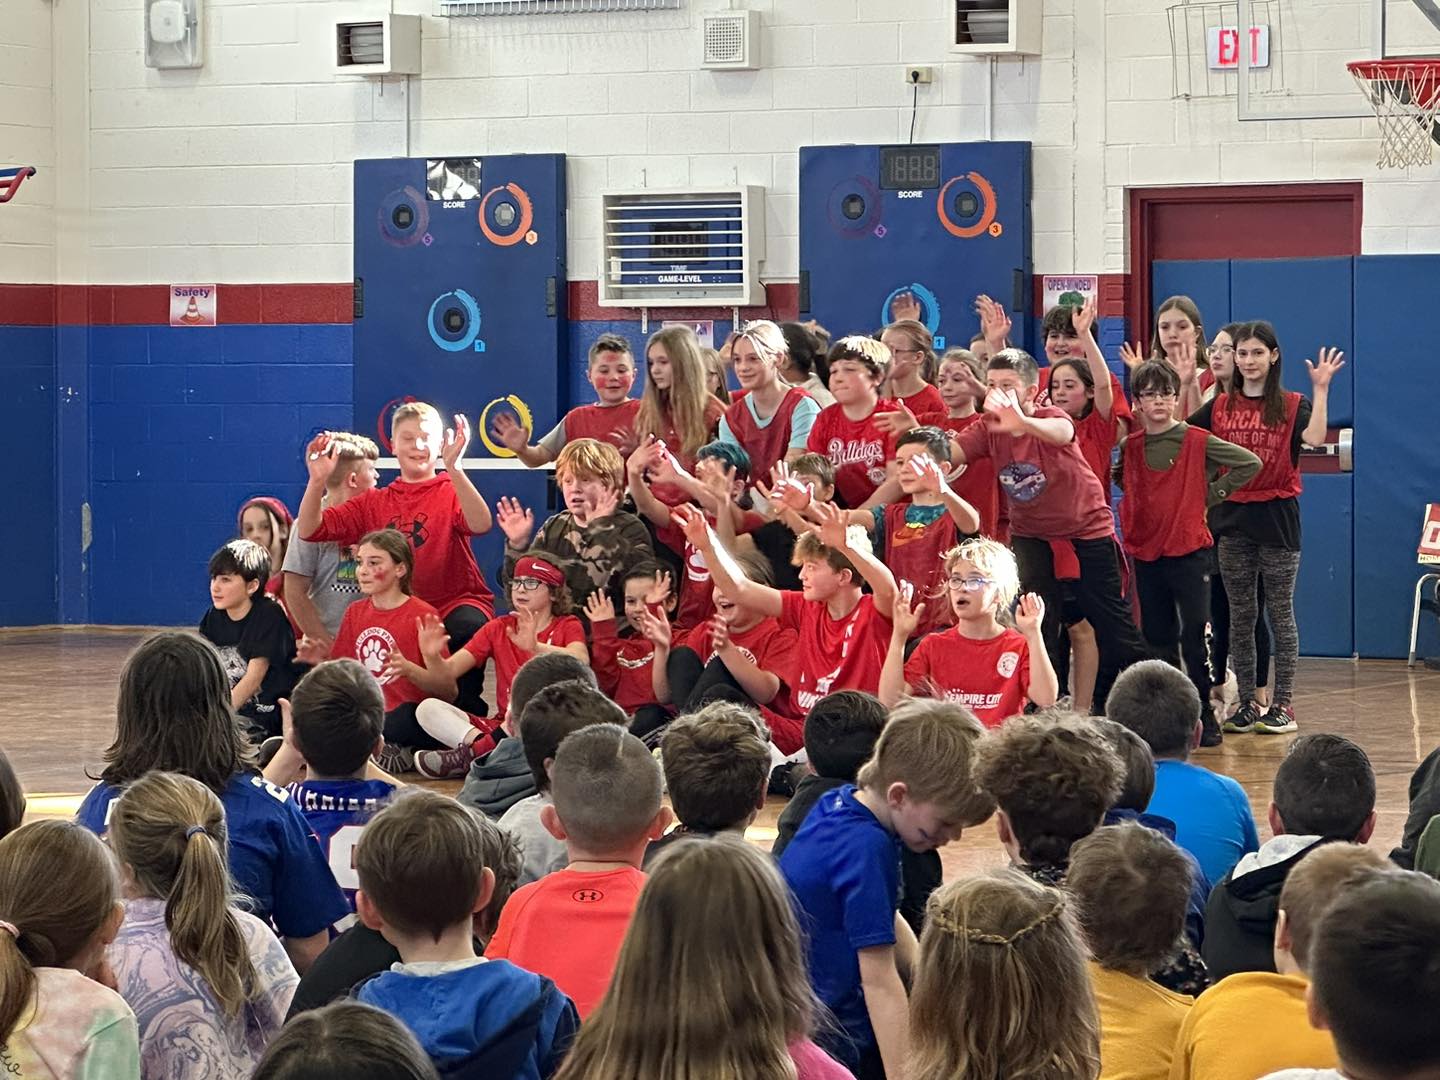 Students in red tee shirts perform a dance.